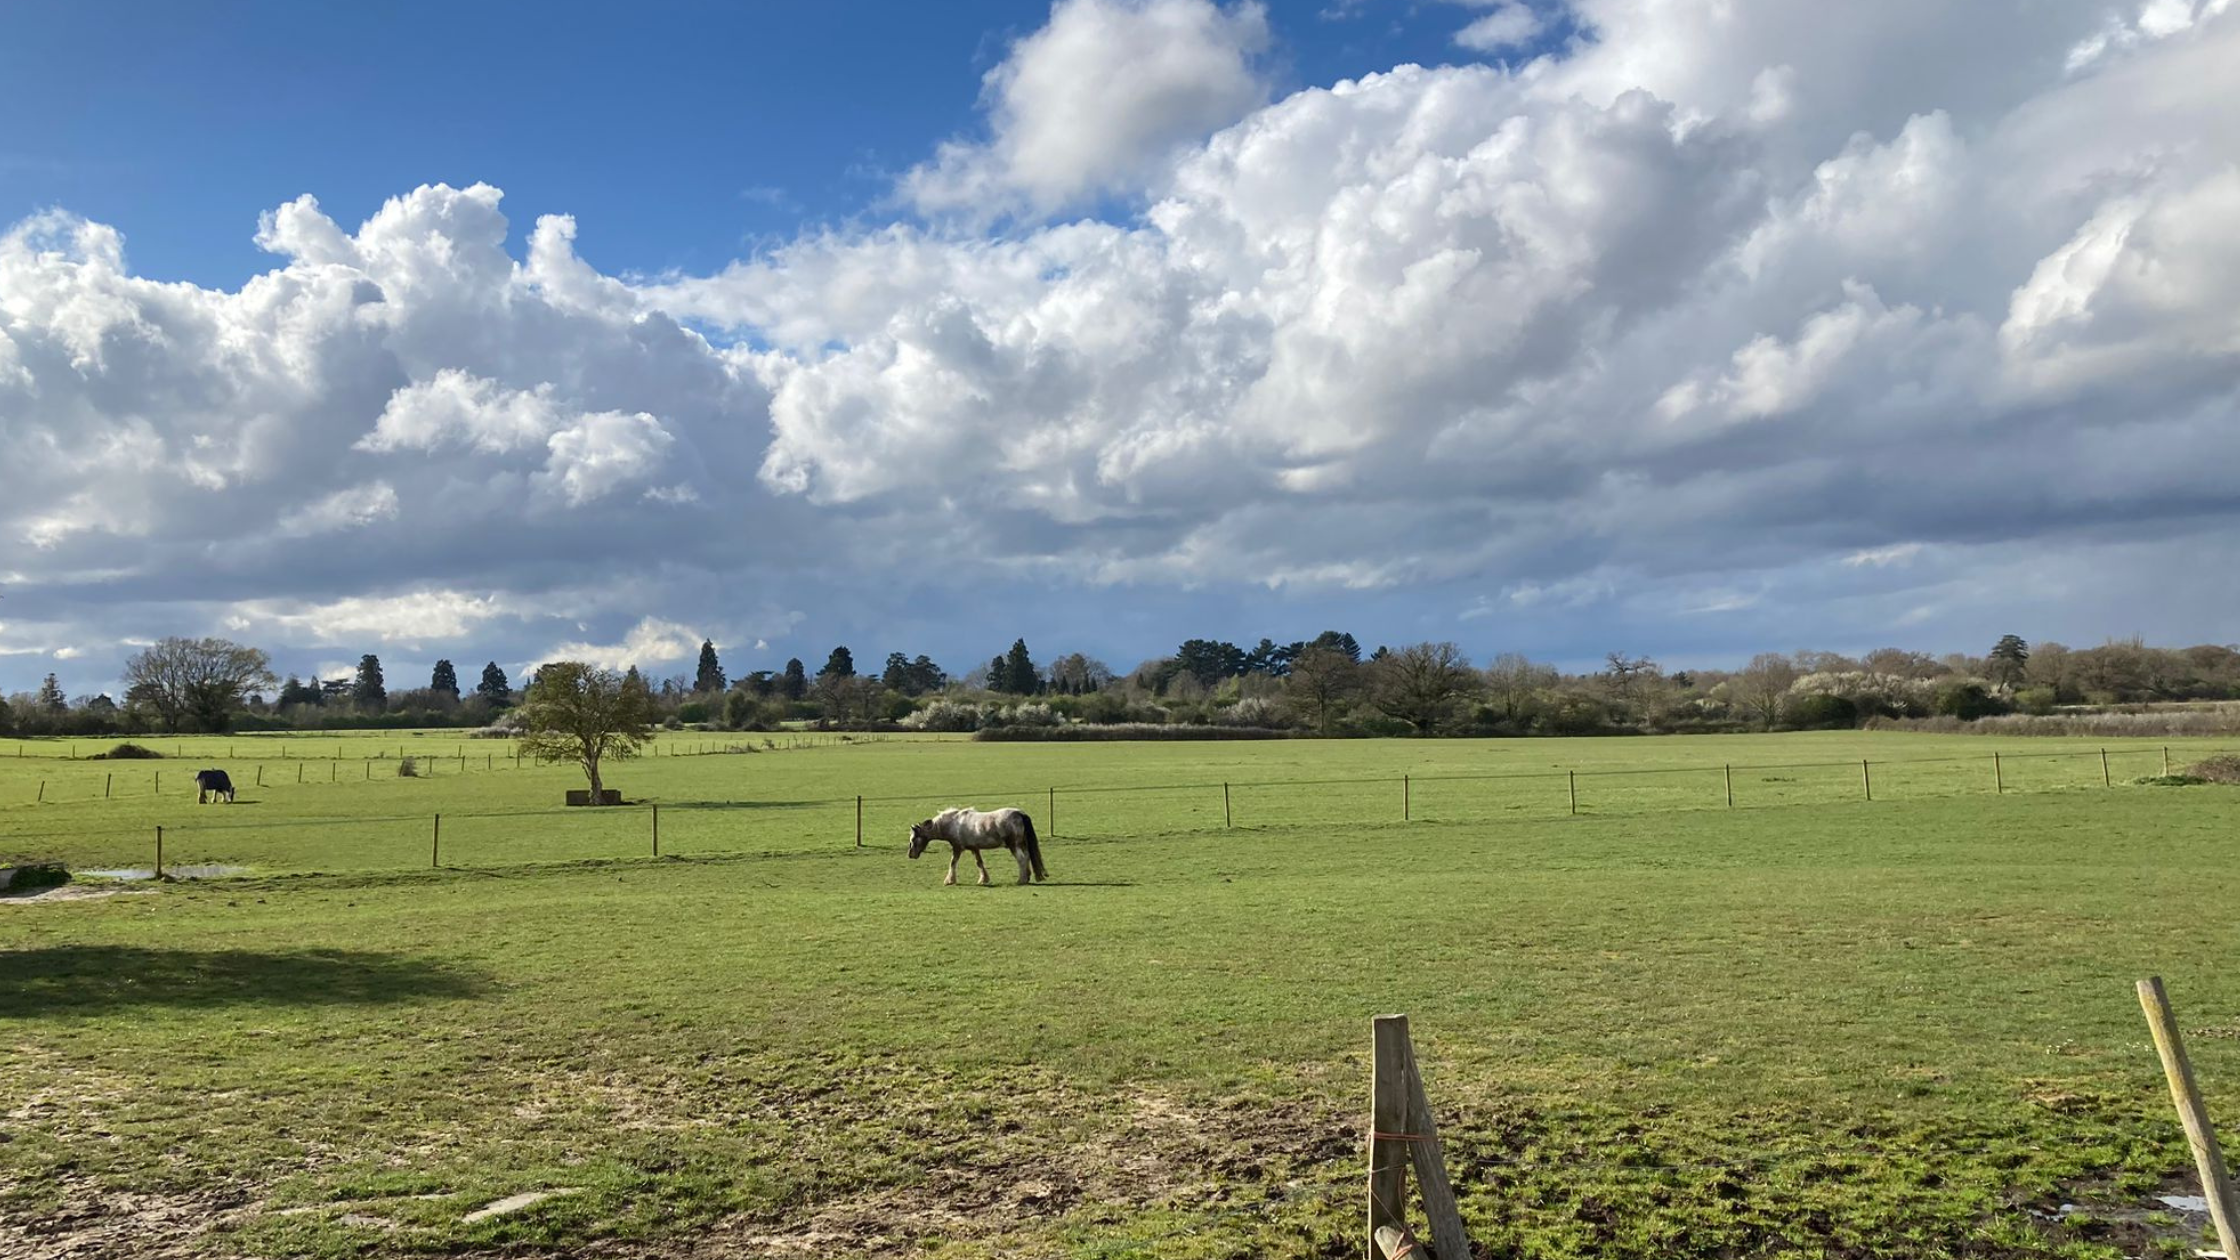 Image of Epsom Green Belt Land. Wide open green field with blue sky and white fluffy clouds. Horses are grazing in the field.